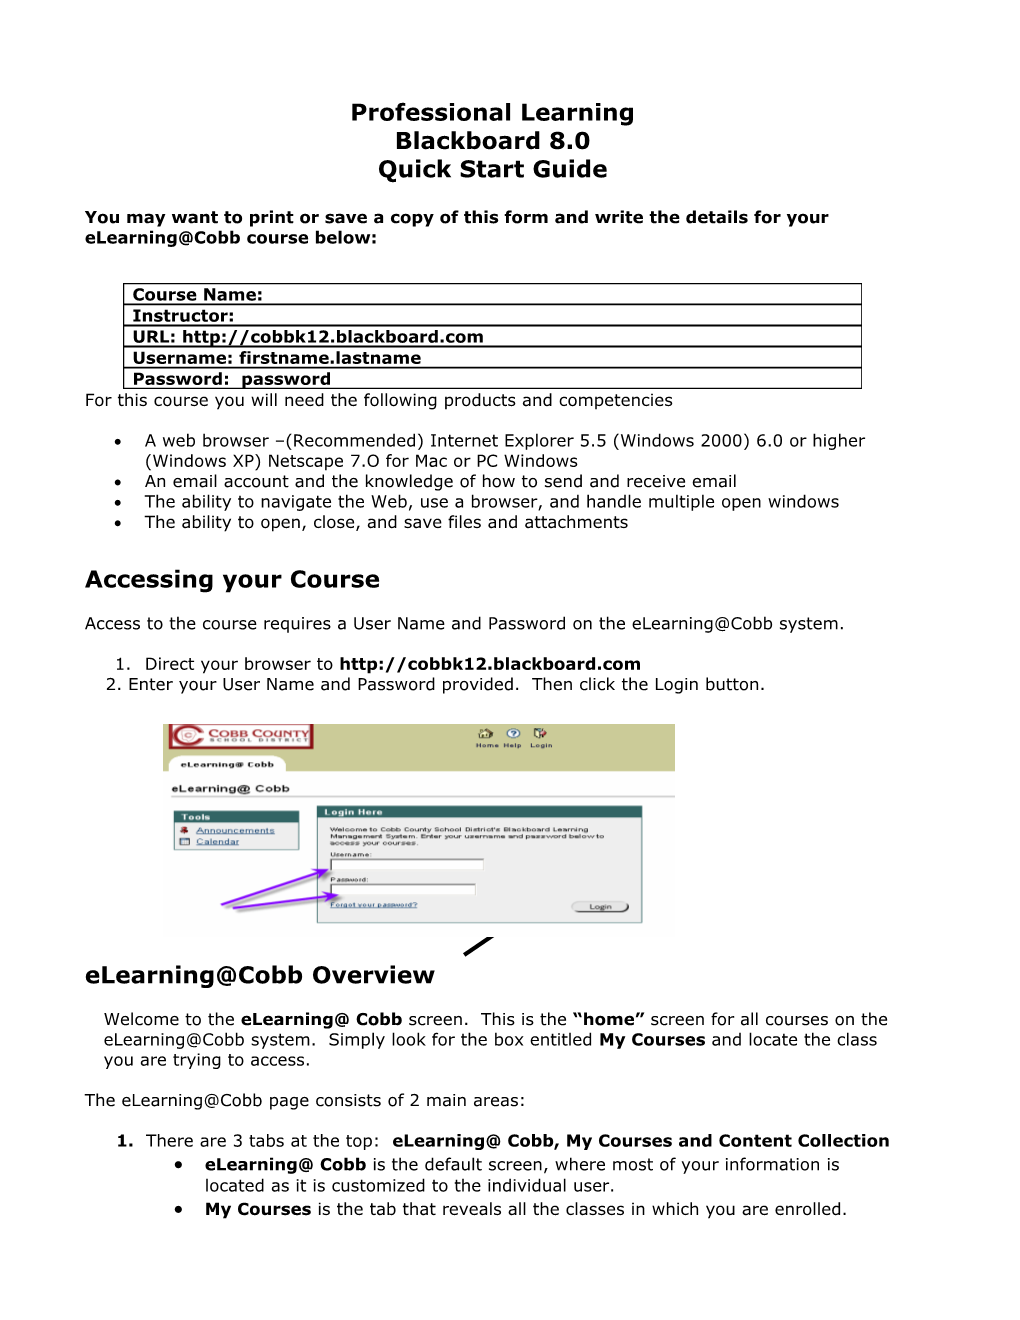 Elearning Cobb Beginners Quick Reference Guide s1